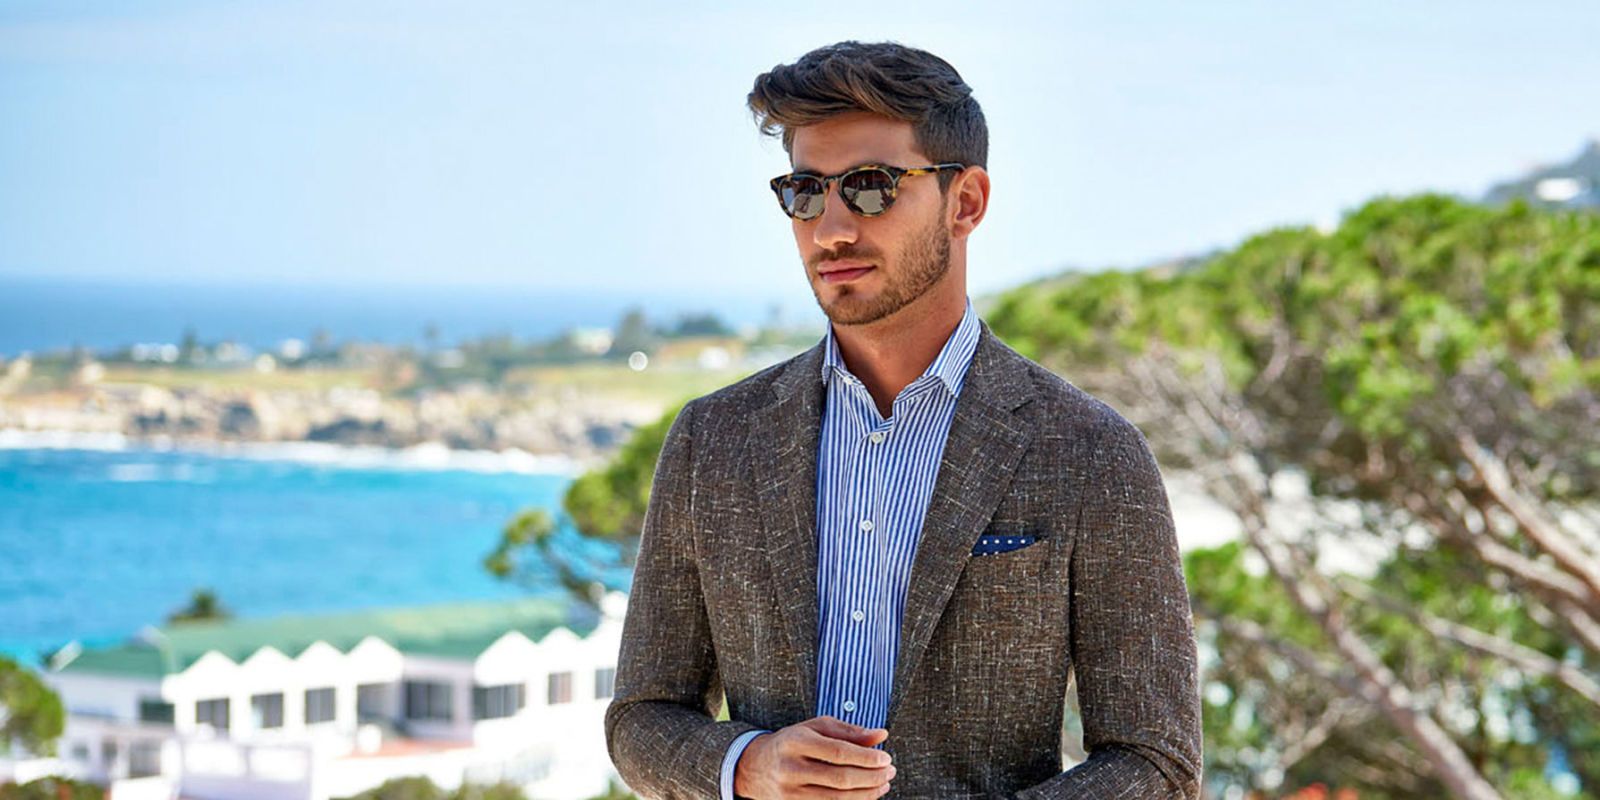 Casual chic: The art of looking smart without a suit – Permanent Style